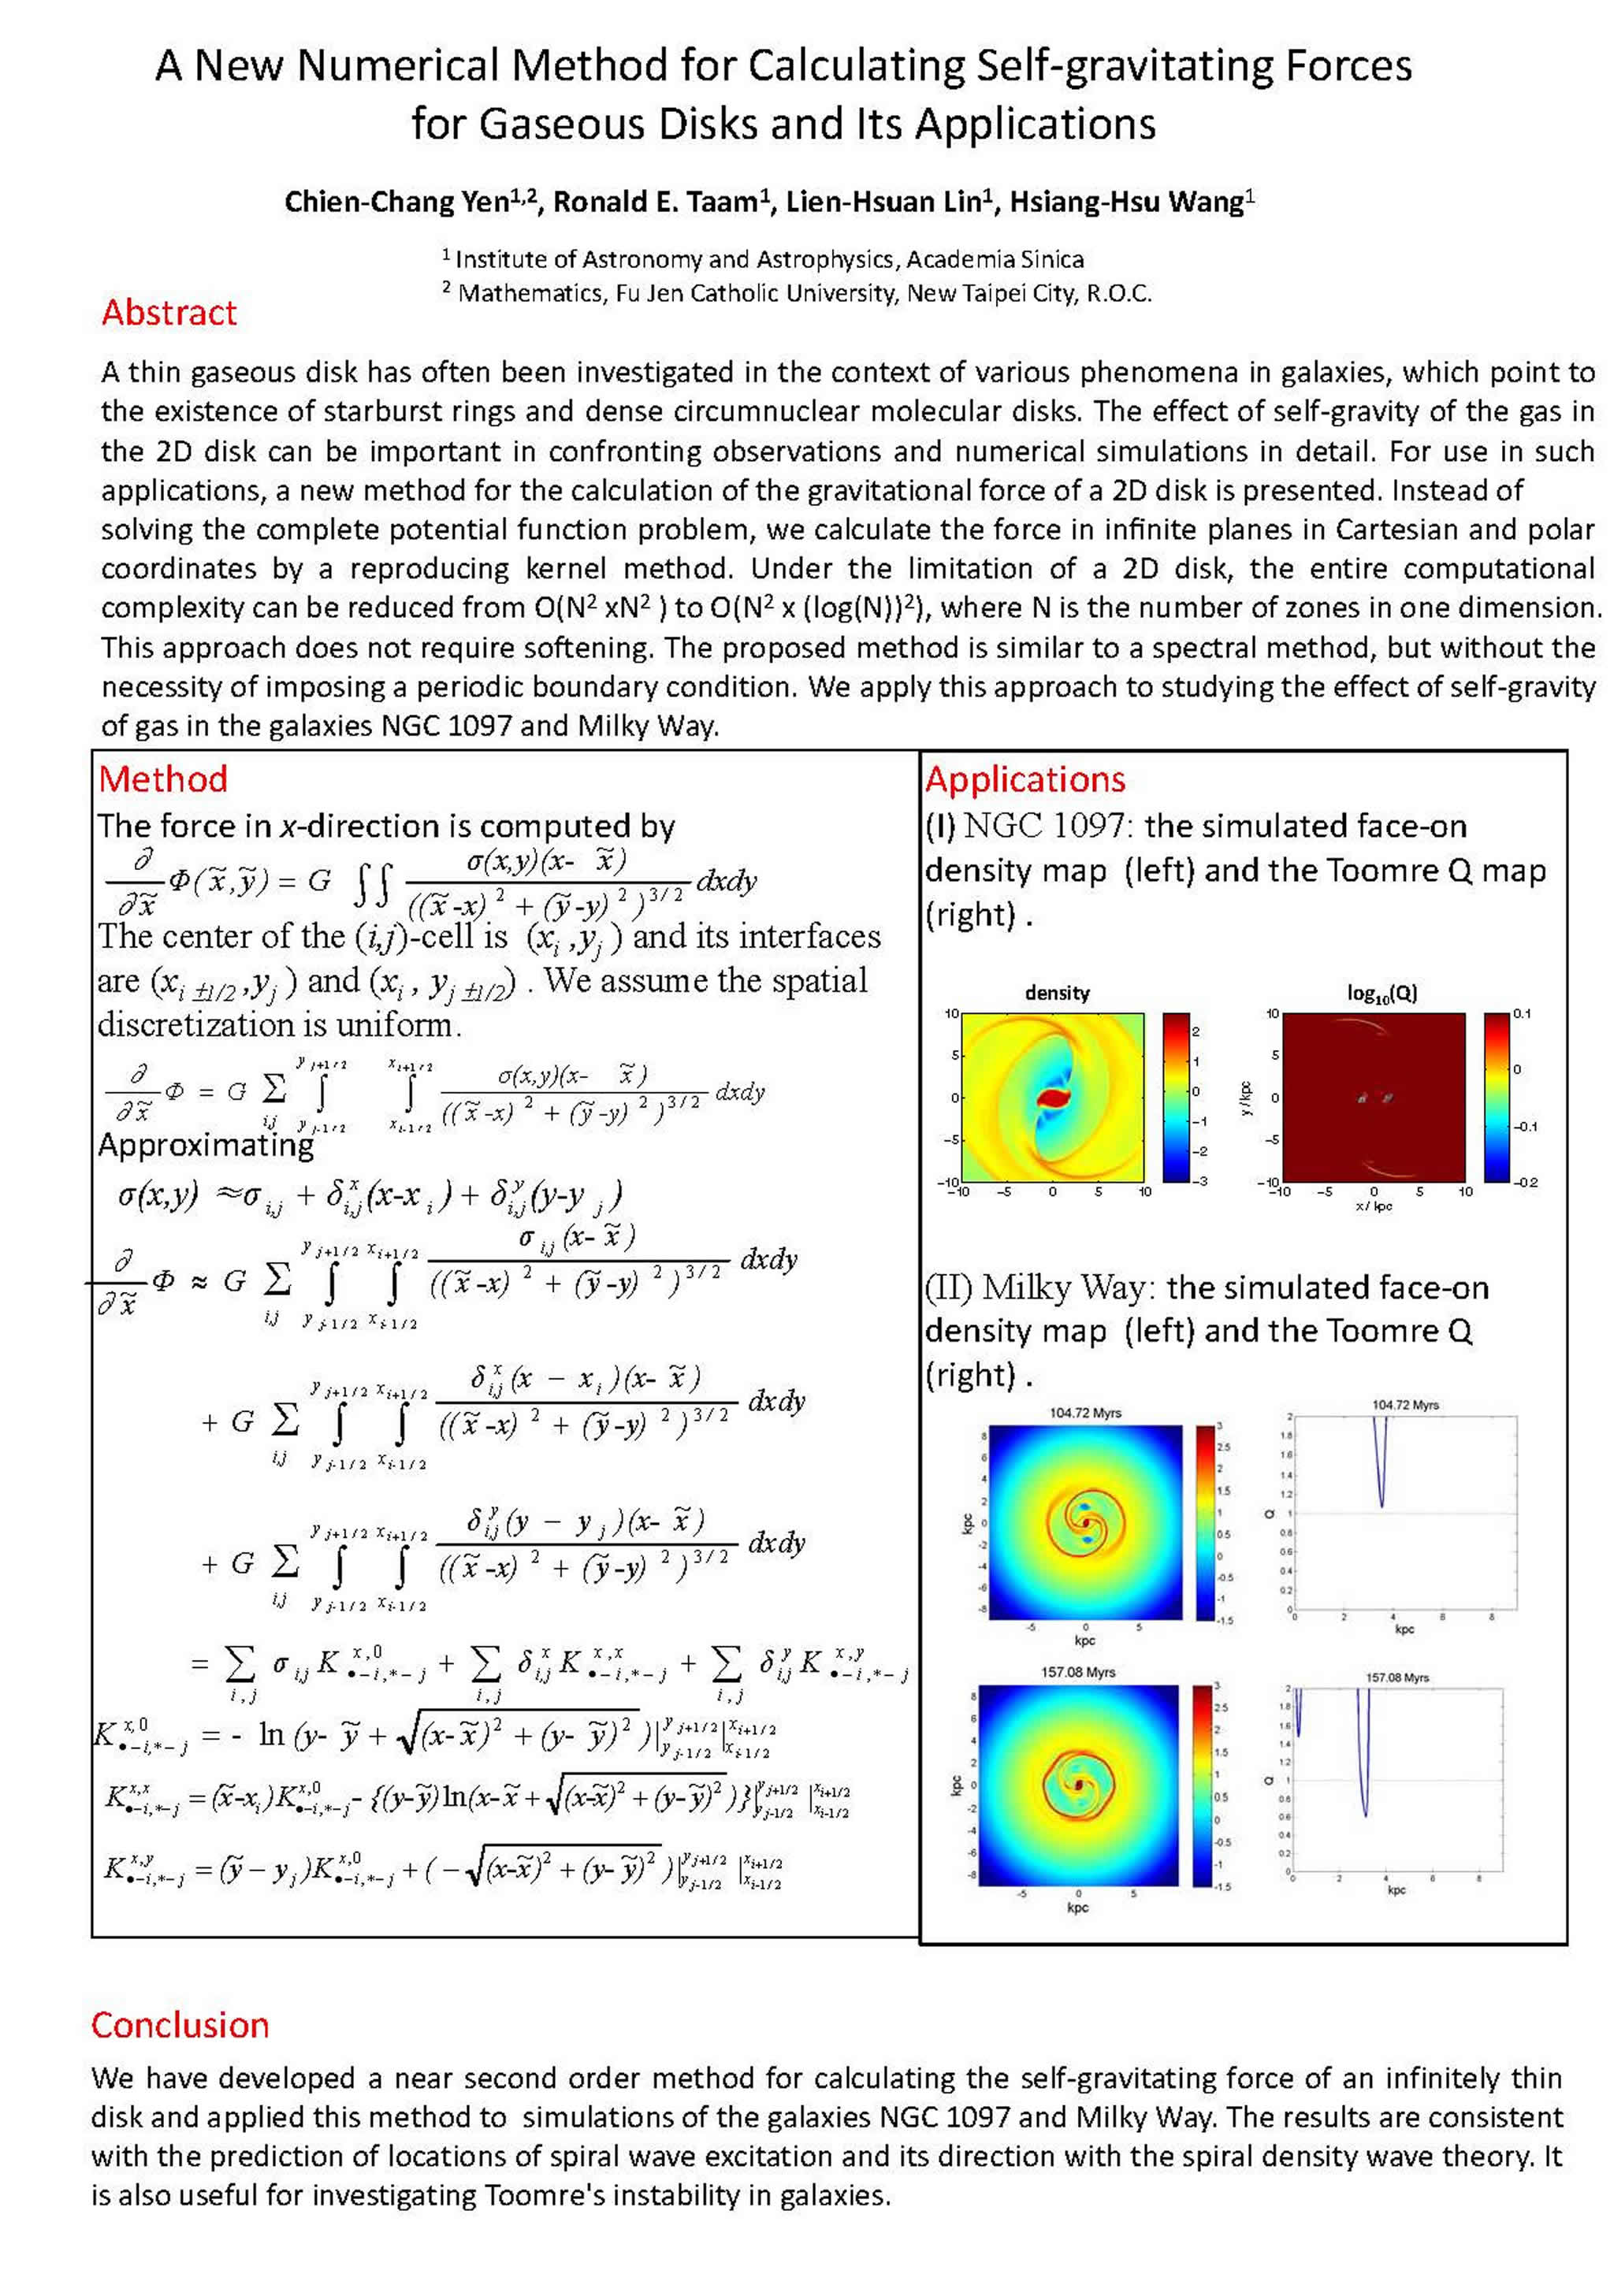 A New Numerical Method for Calculating Self-gravitating Forces for Gaseous Disks and Its Applications